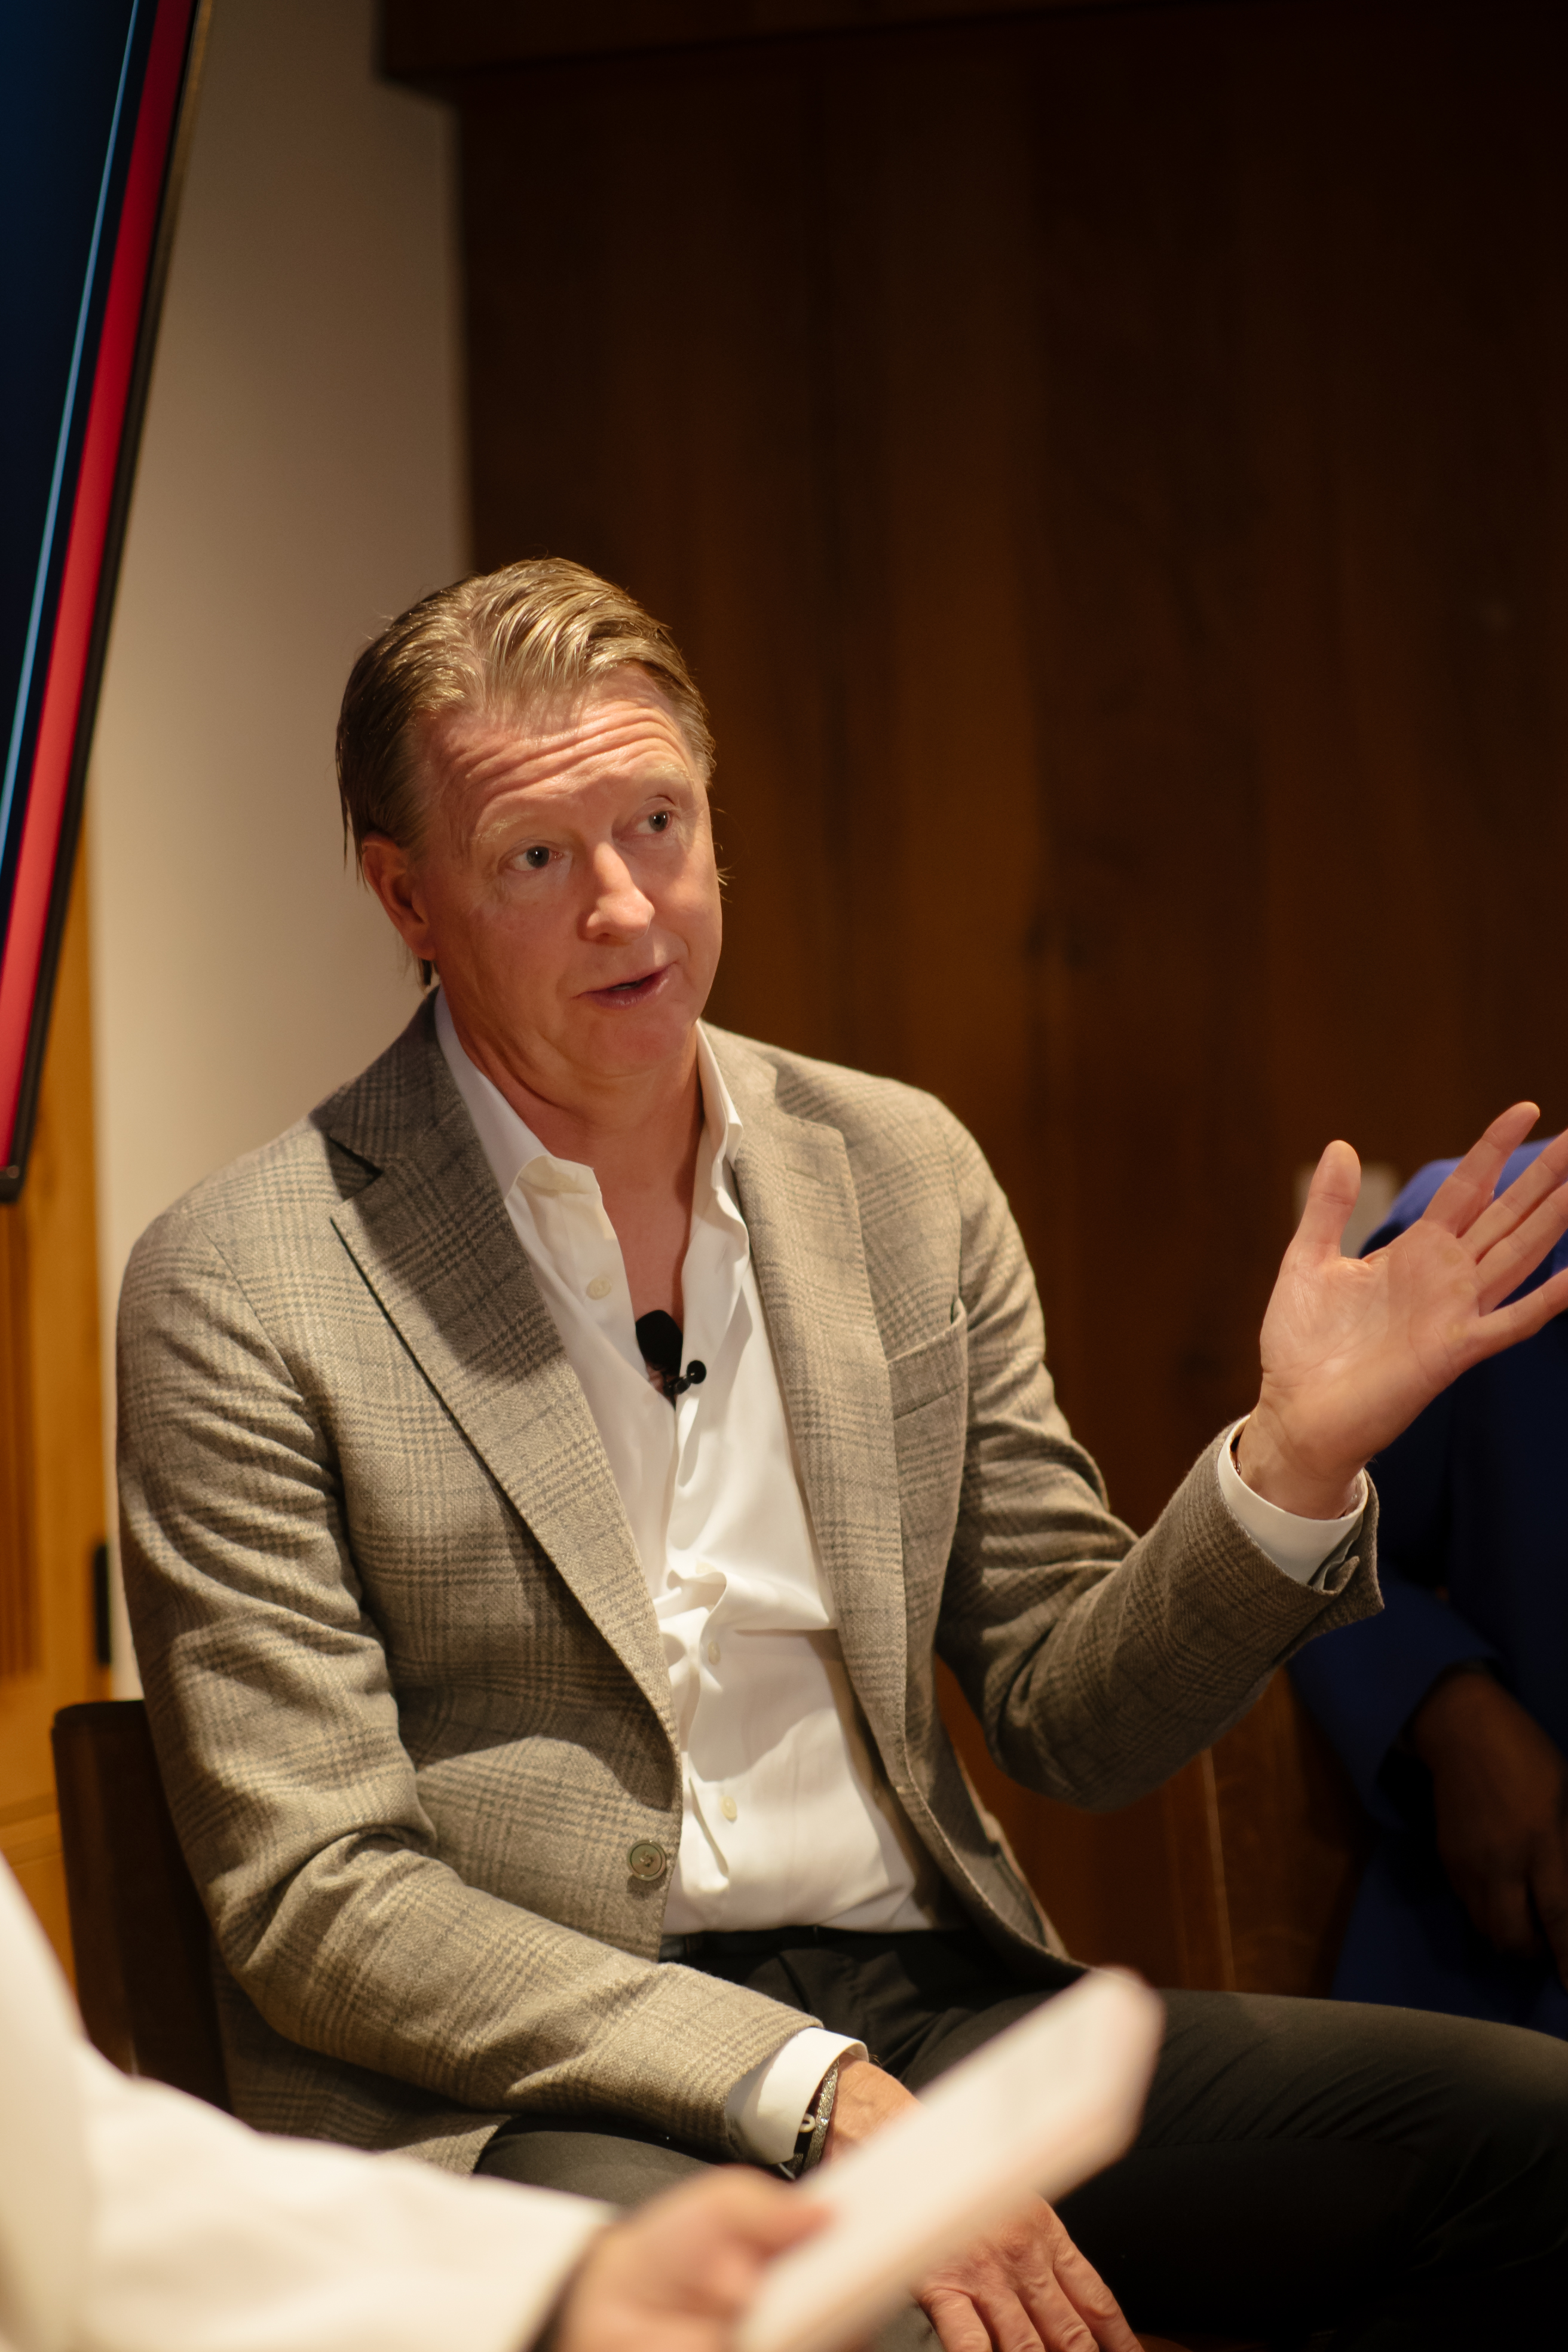 Verizon chairman and chief executive officer Hans Vestberg